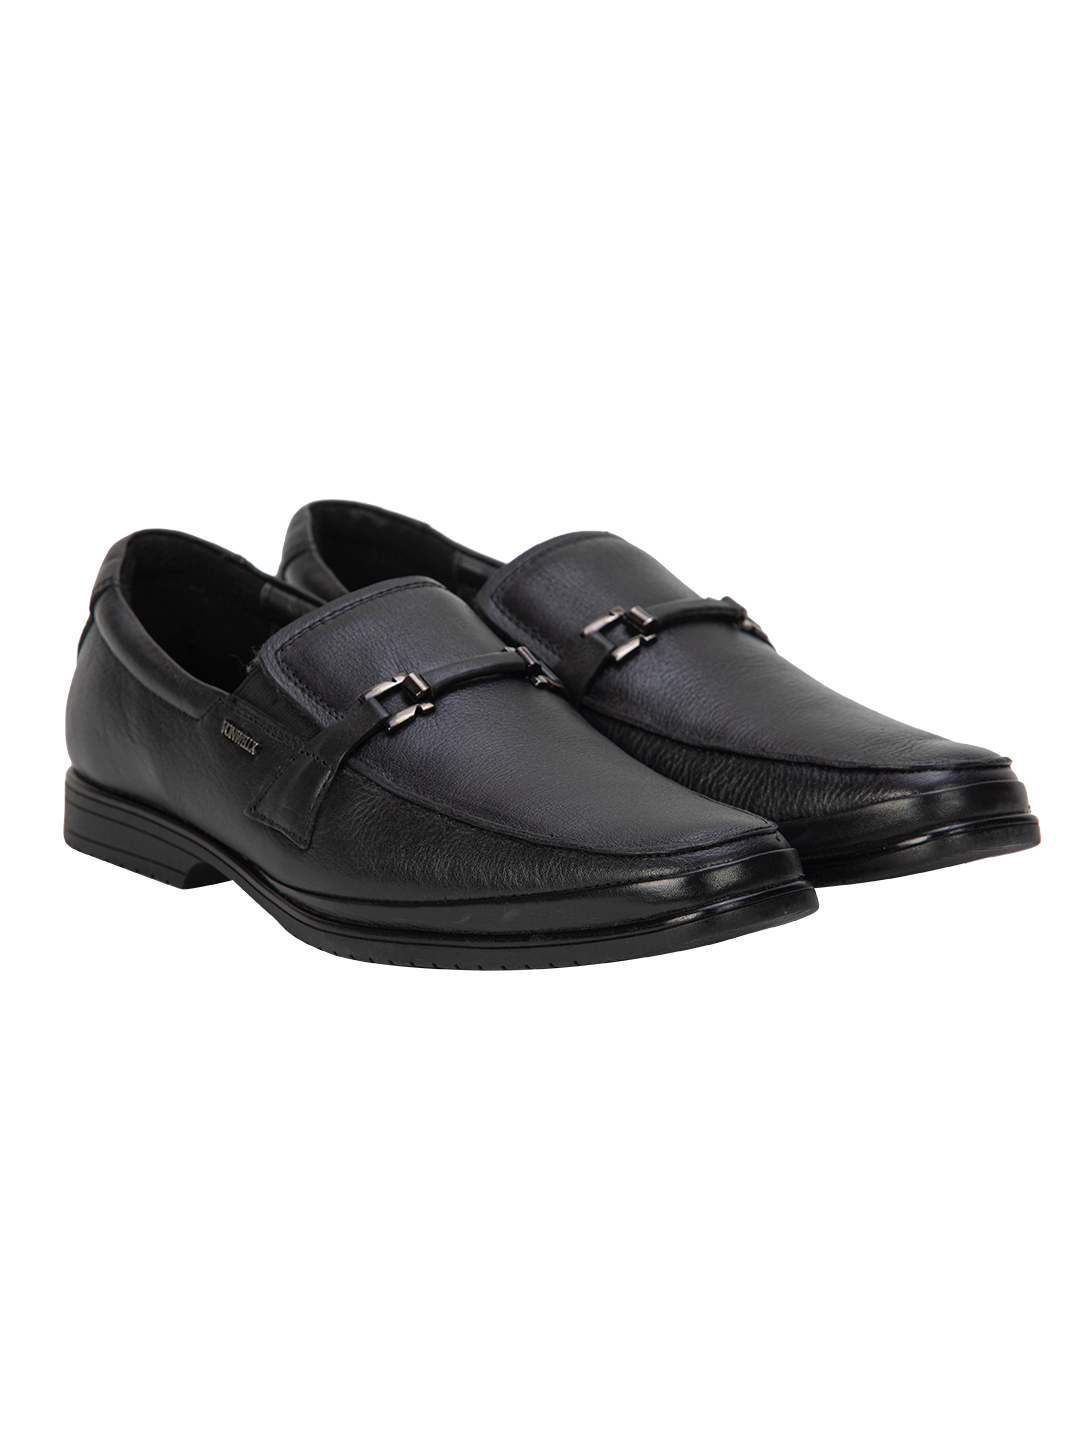 Buy Von Wellx Germany Comfort Black Jace Shoes Online in Colombo